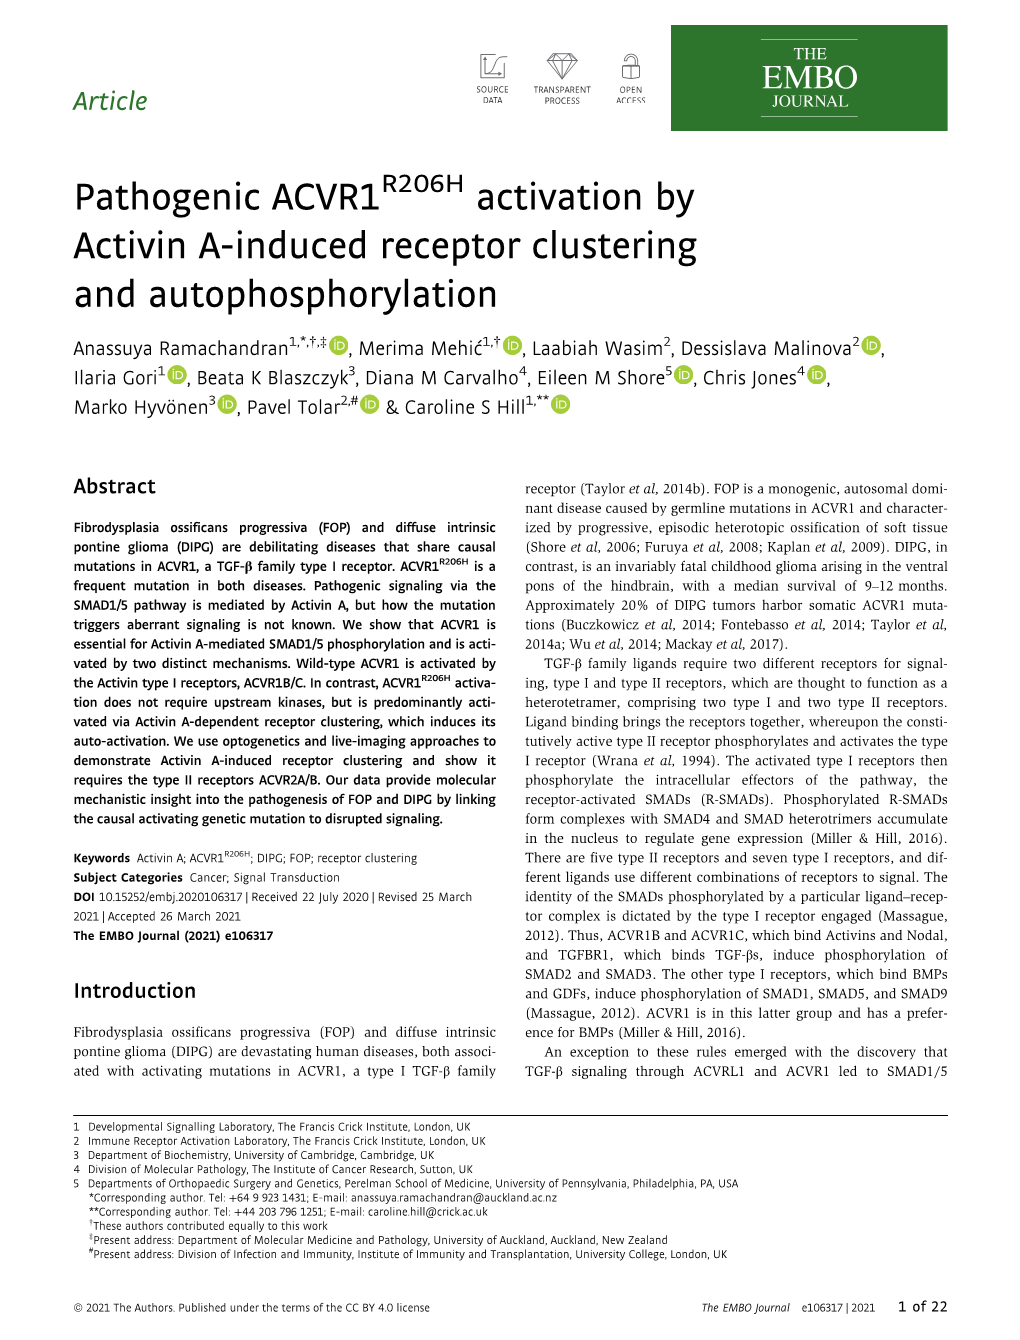 Pathogenic ACVR1R206H Activation by Activin A‐Induced Receptor